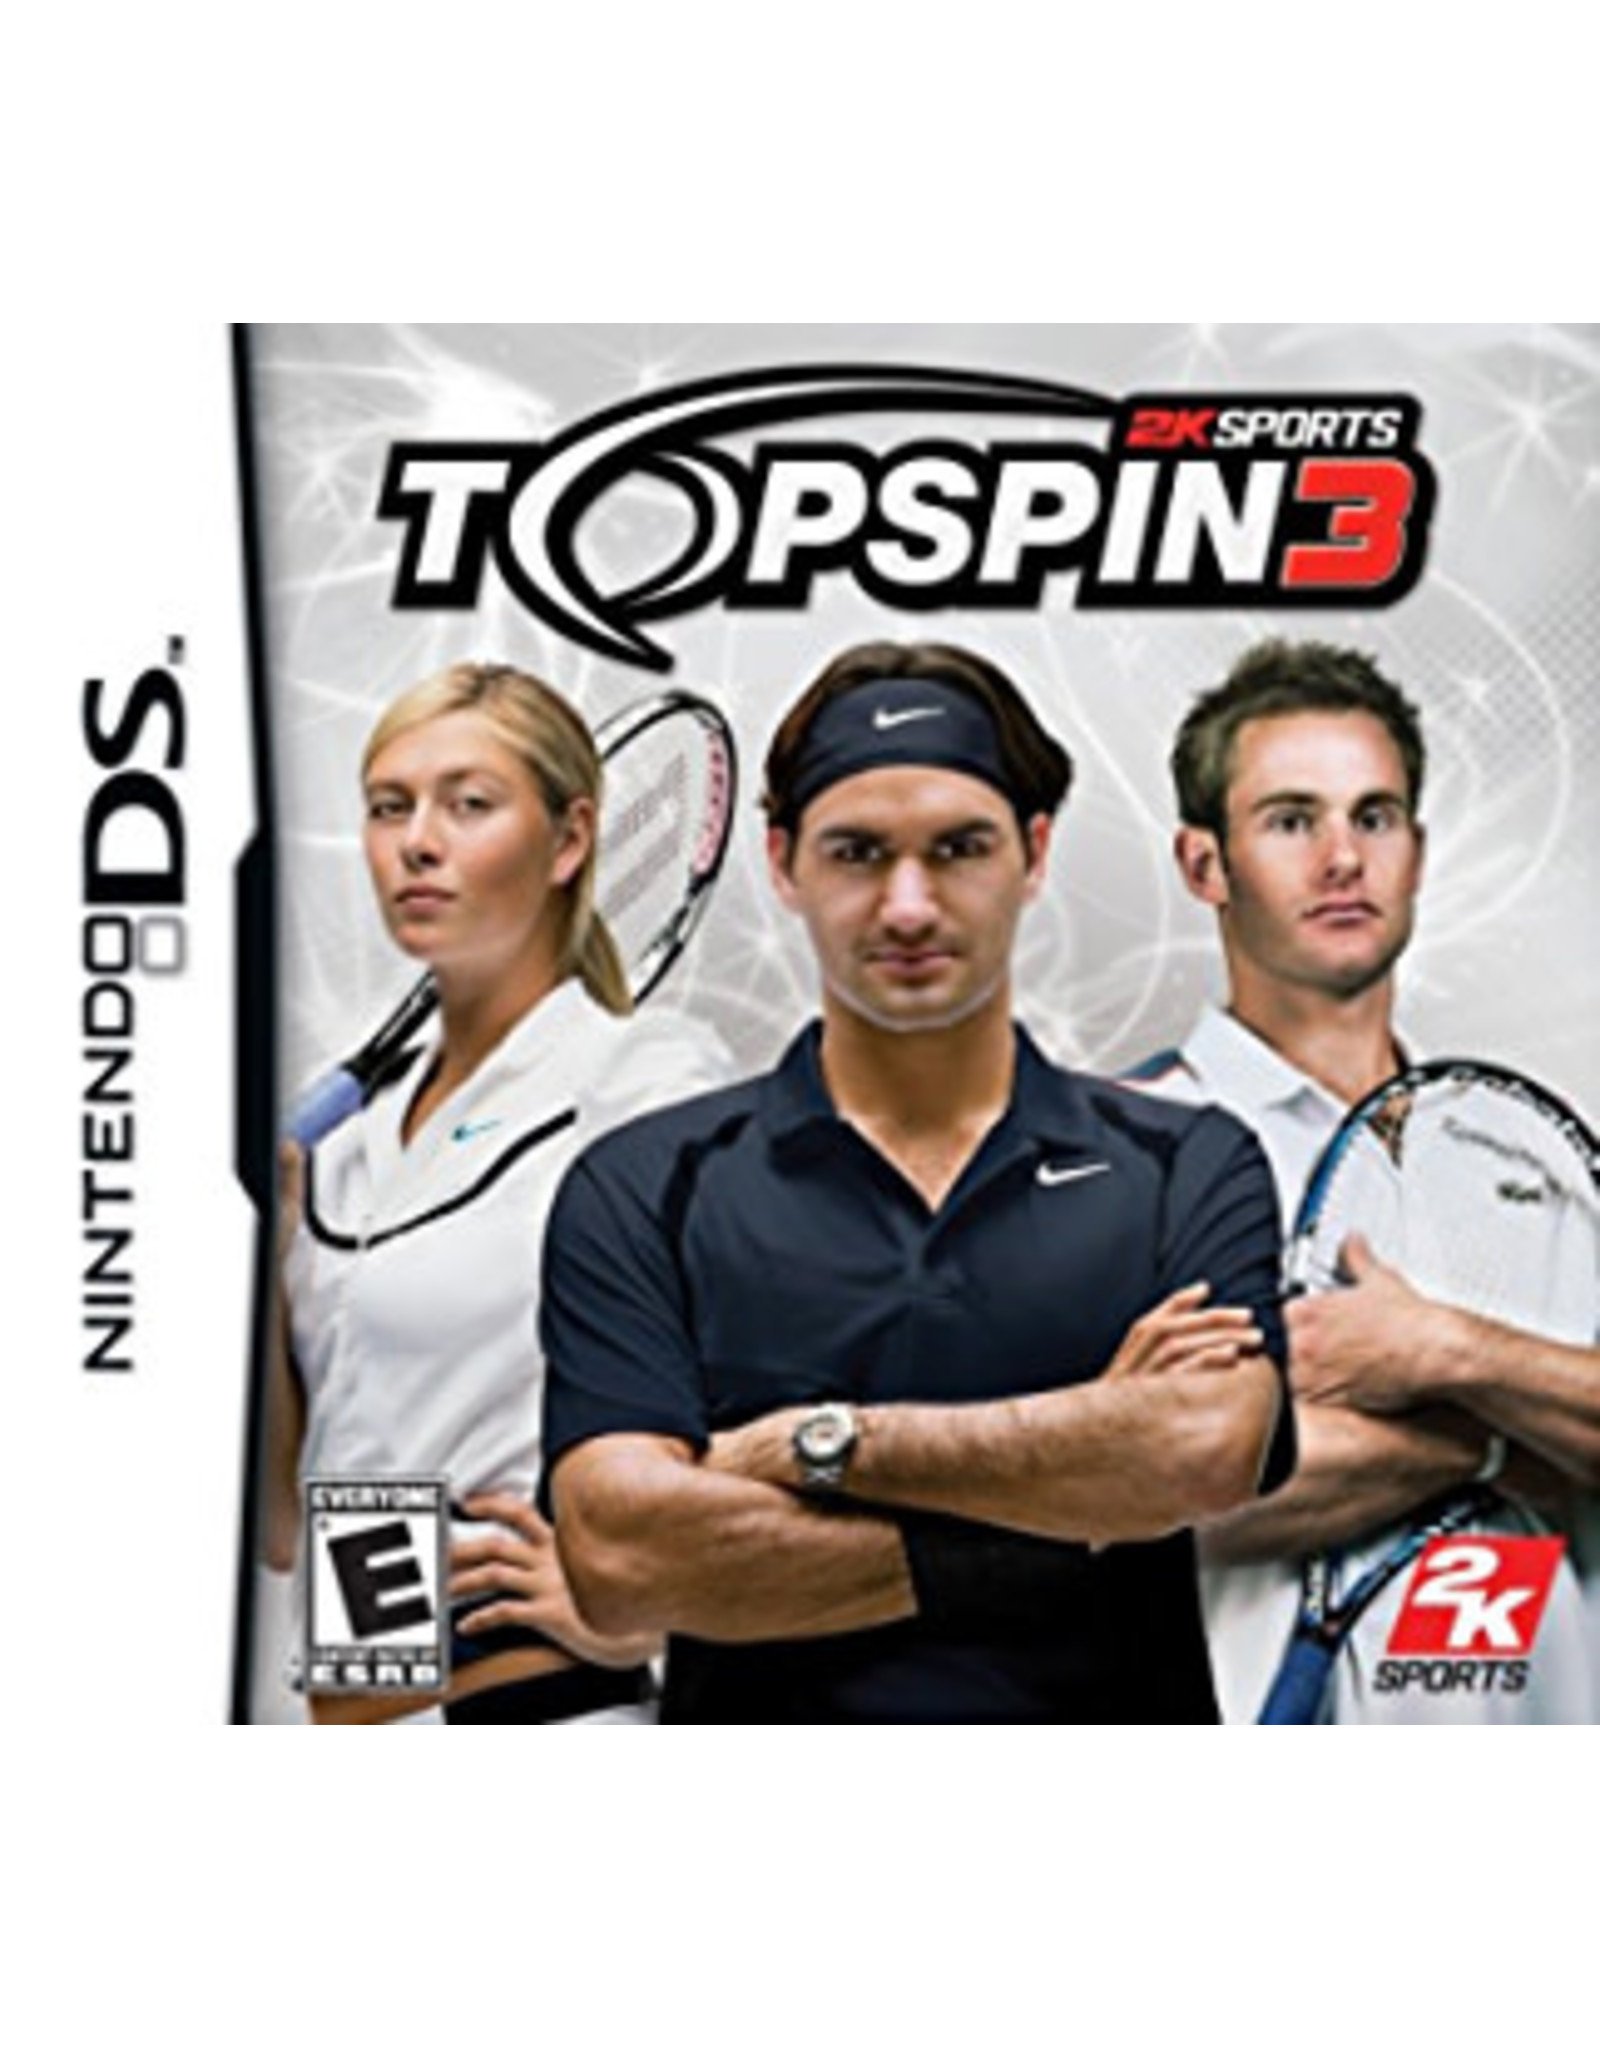 Nintendo DS Top Spin 3 (Cart Only)